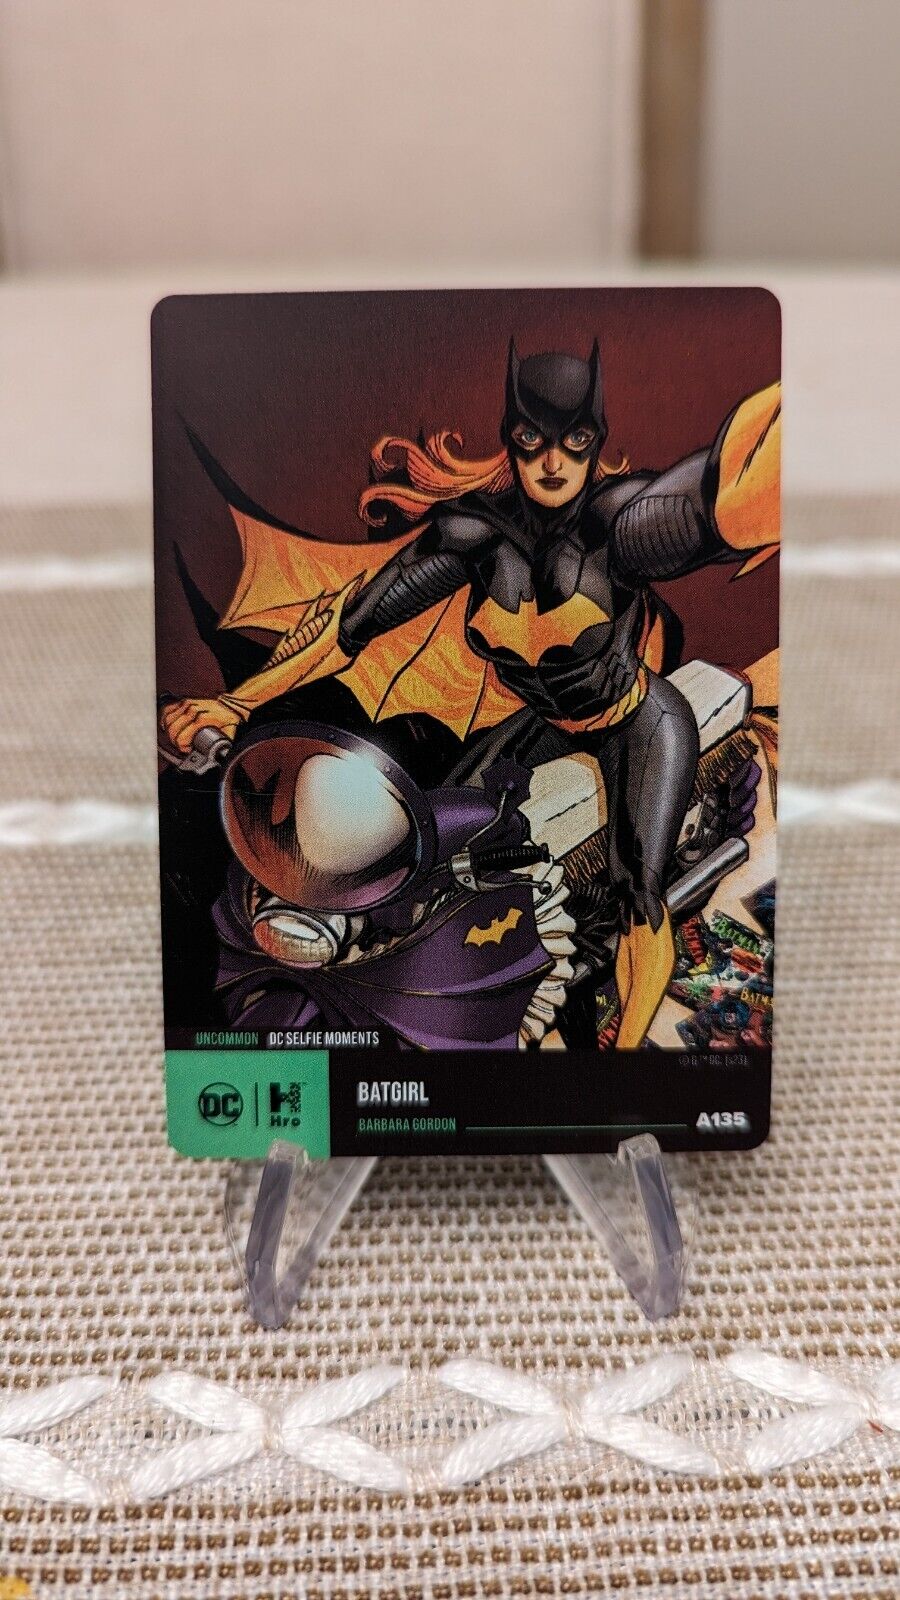 *Physical Only* DC Selfie Moments Batgirl Barbara Gordon #A135 LOW MINT